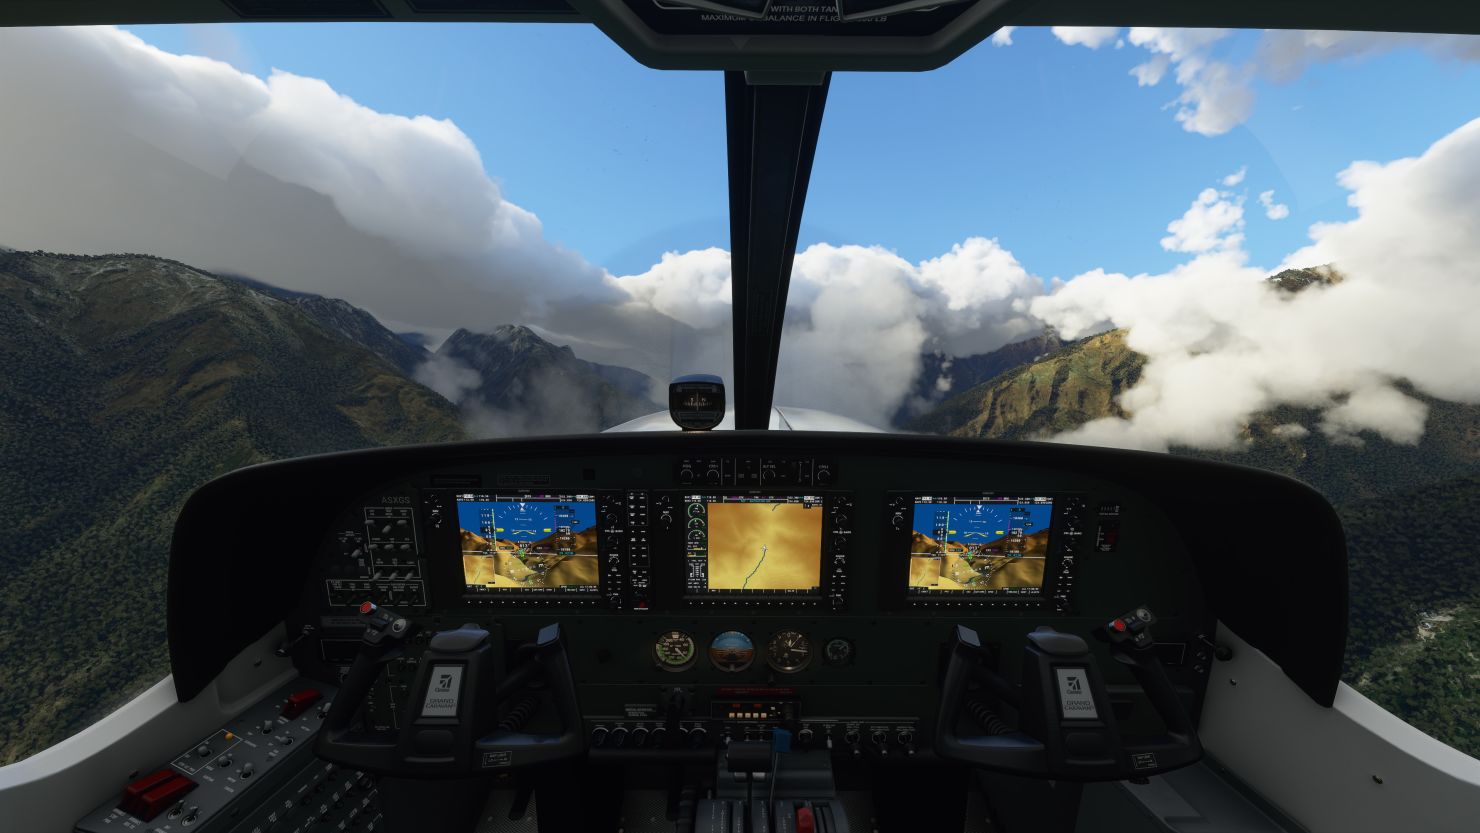 Microsoft Flight Simulator guide: How to choose the best